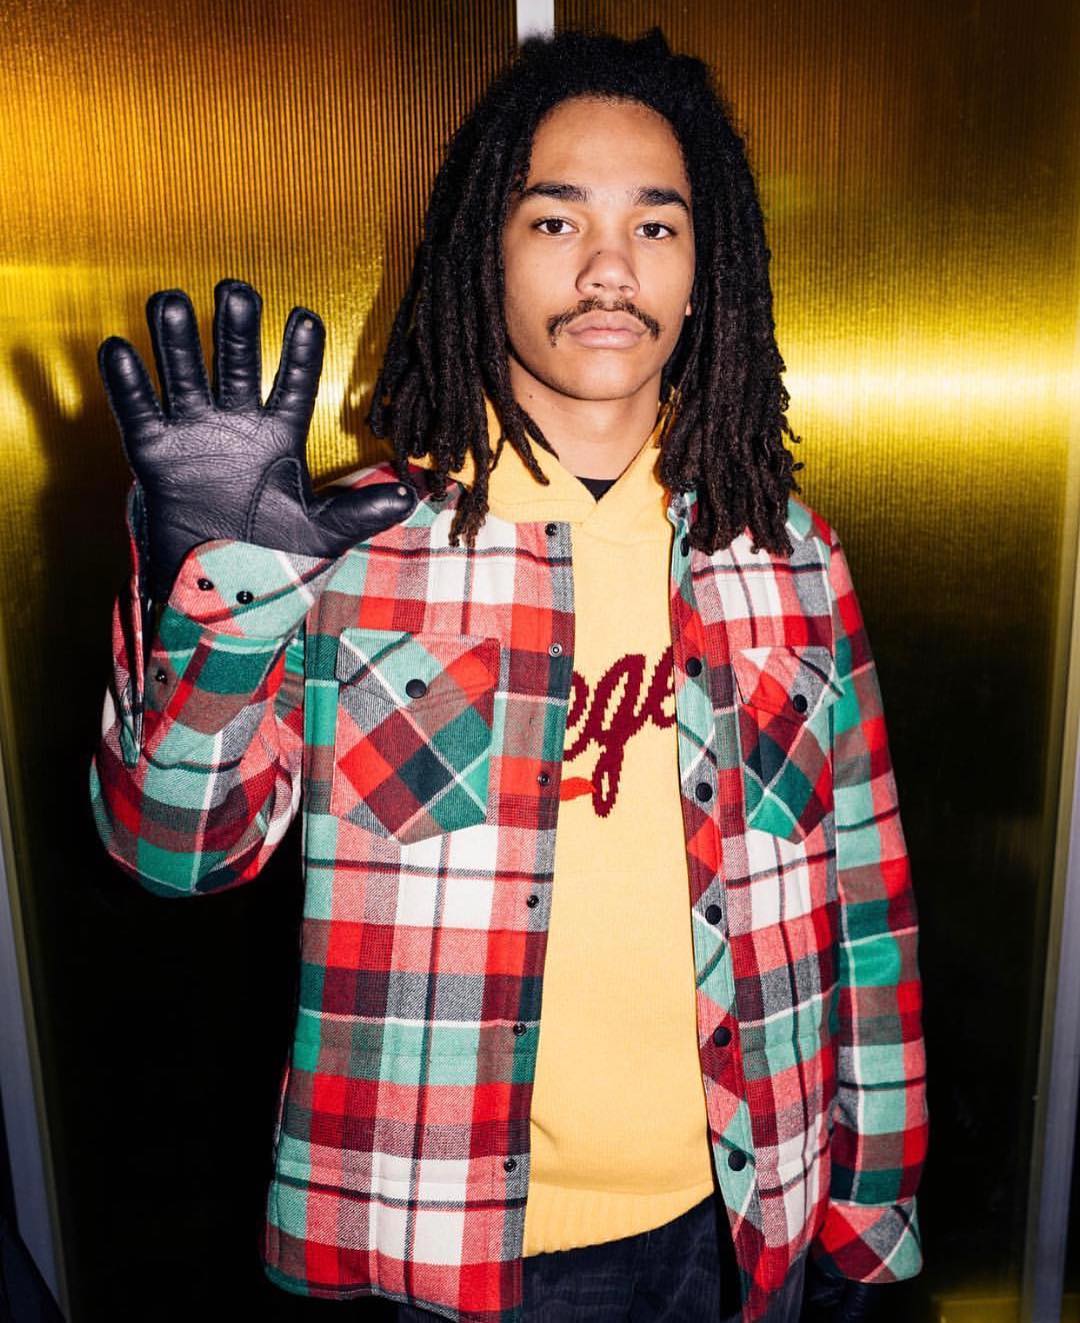 SPOTTED: Luka Sabbat Attends Moncler Genius Project in Milan